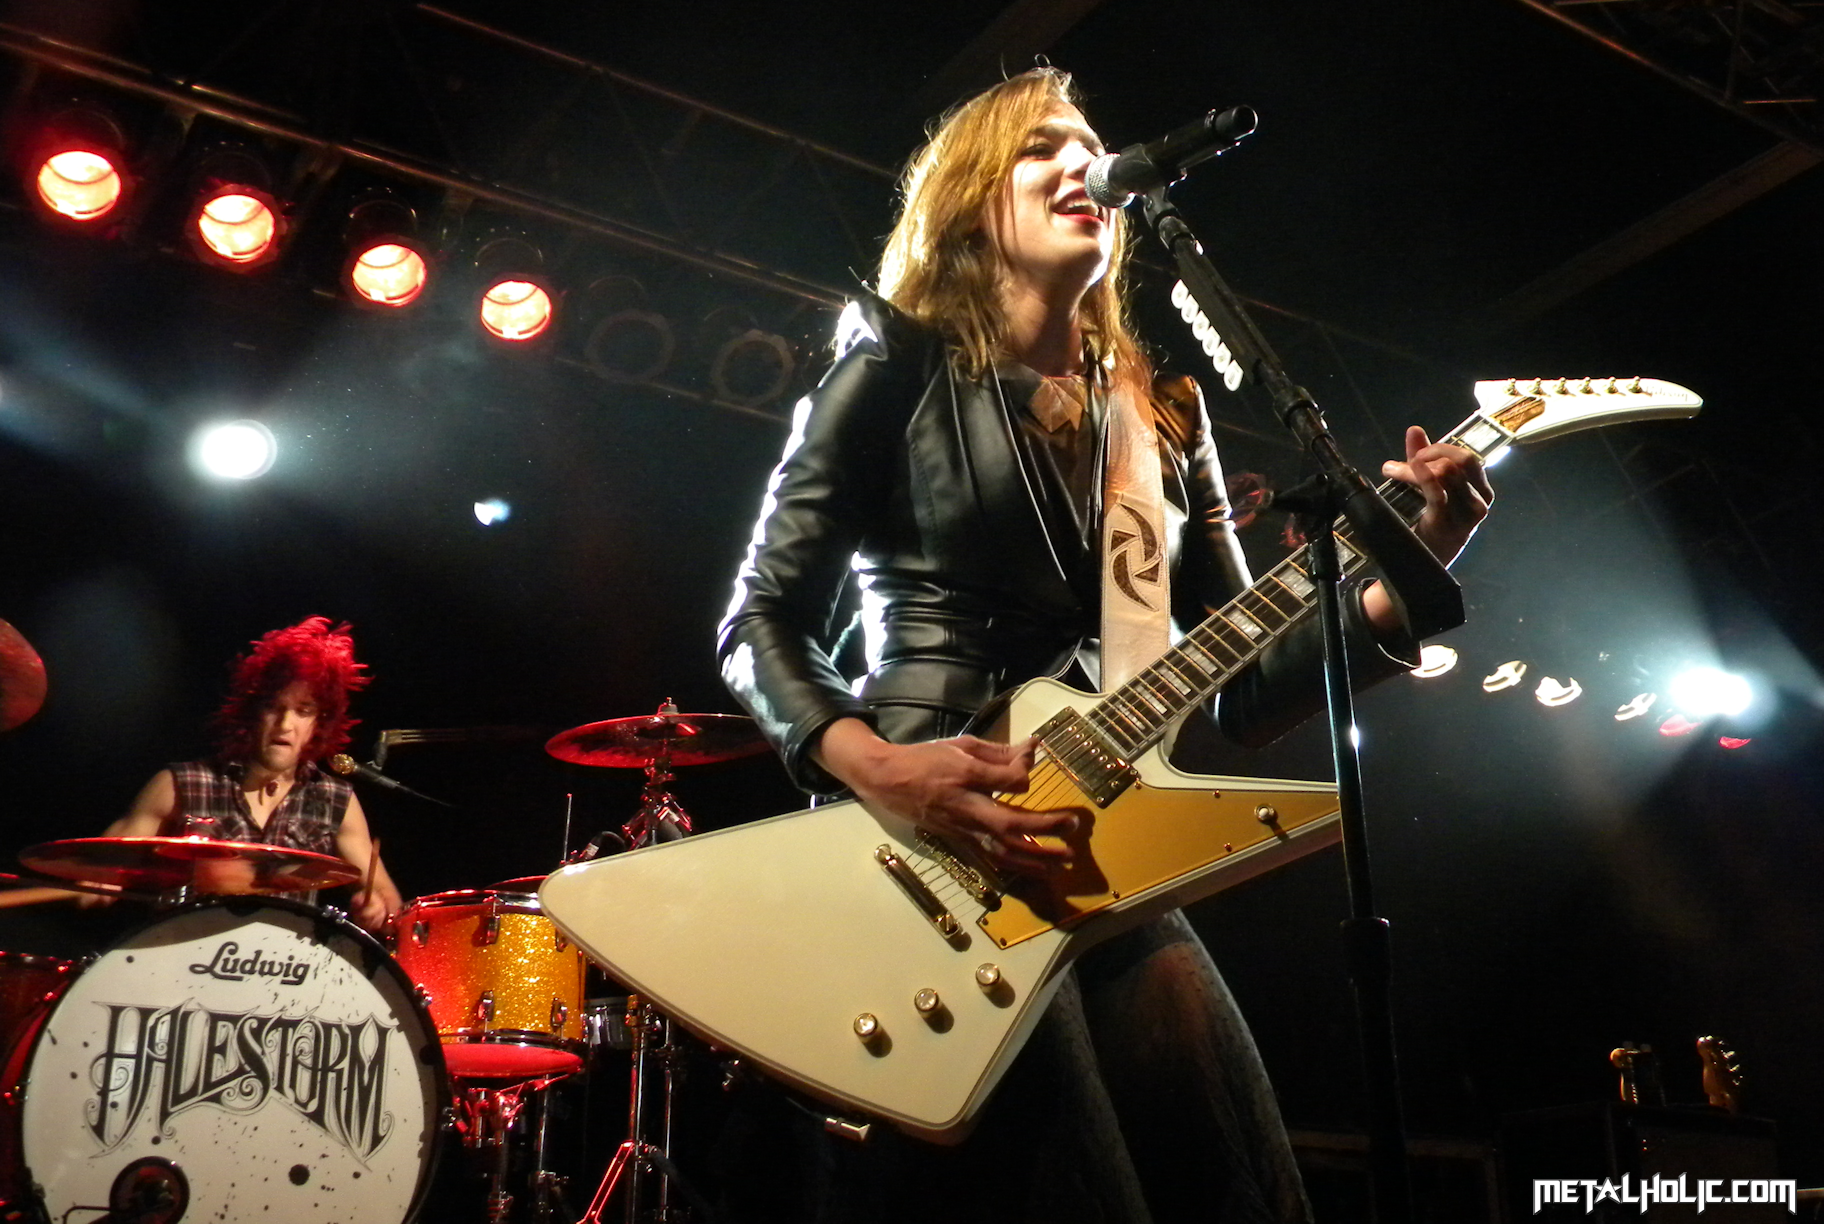 Lzzy Hale Cute Related Keywords & Suggestions - Lzzy Hale Cu. 